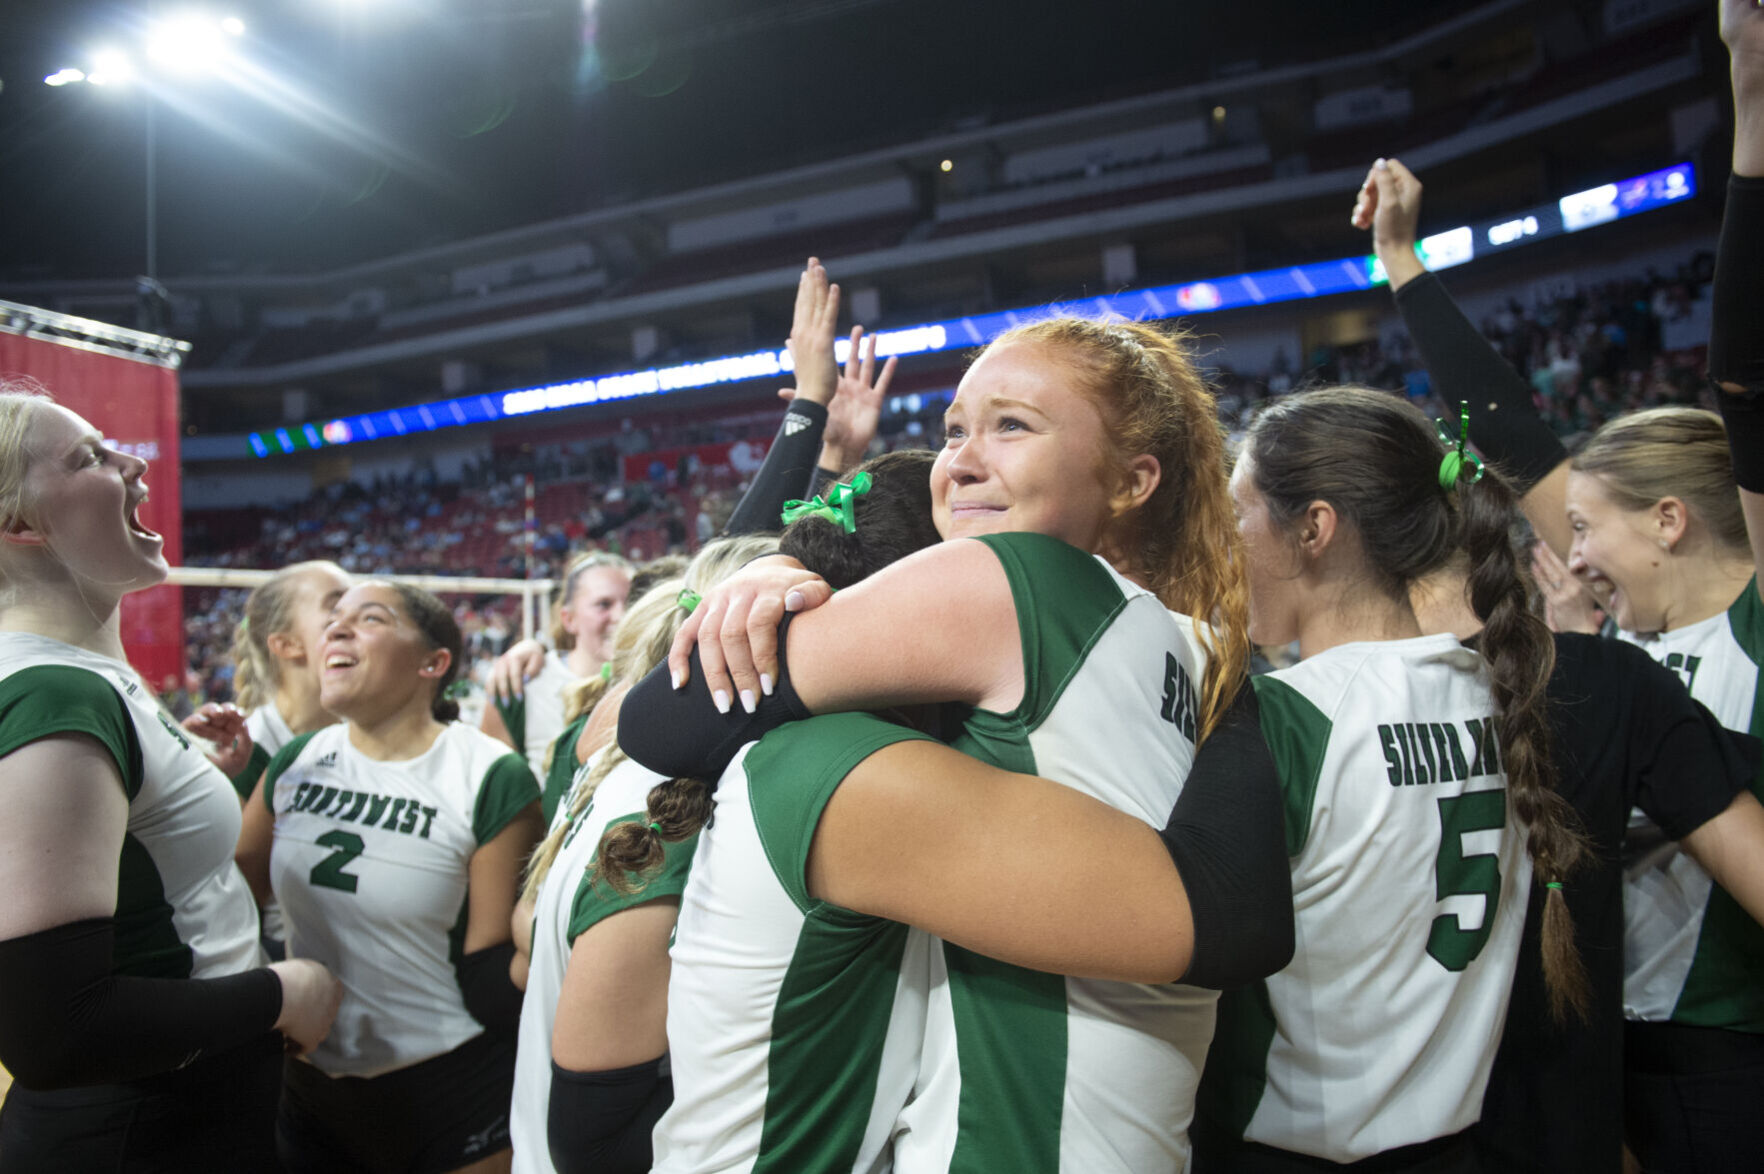 Lincoln Southwest volleyball team makes history, reaches first-ever state championship match